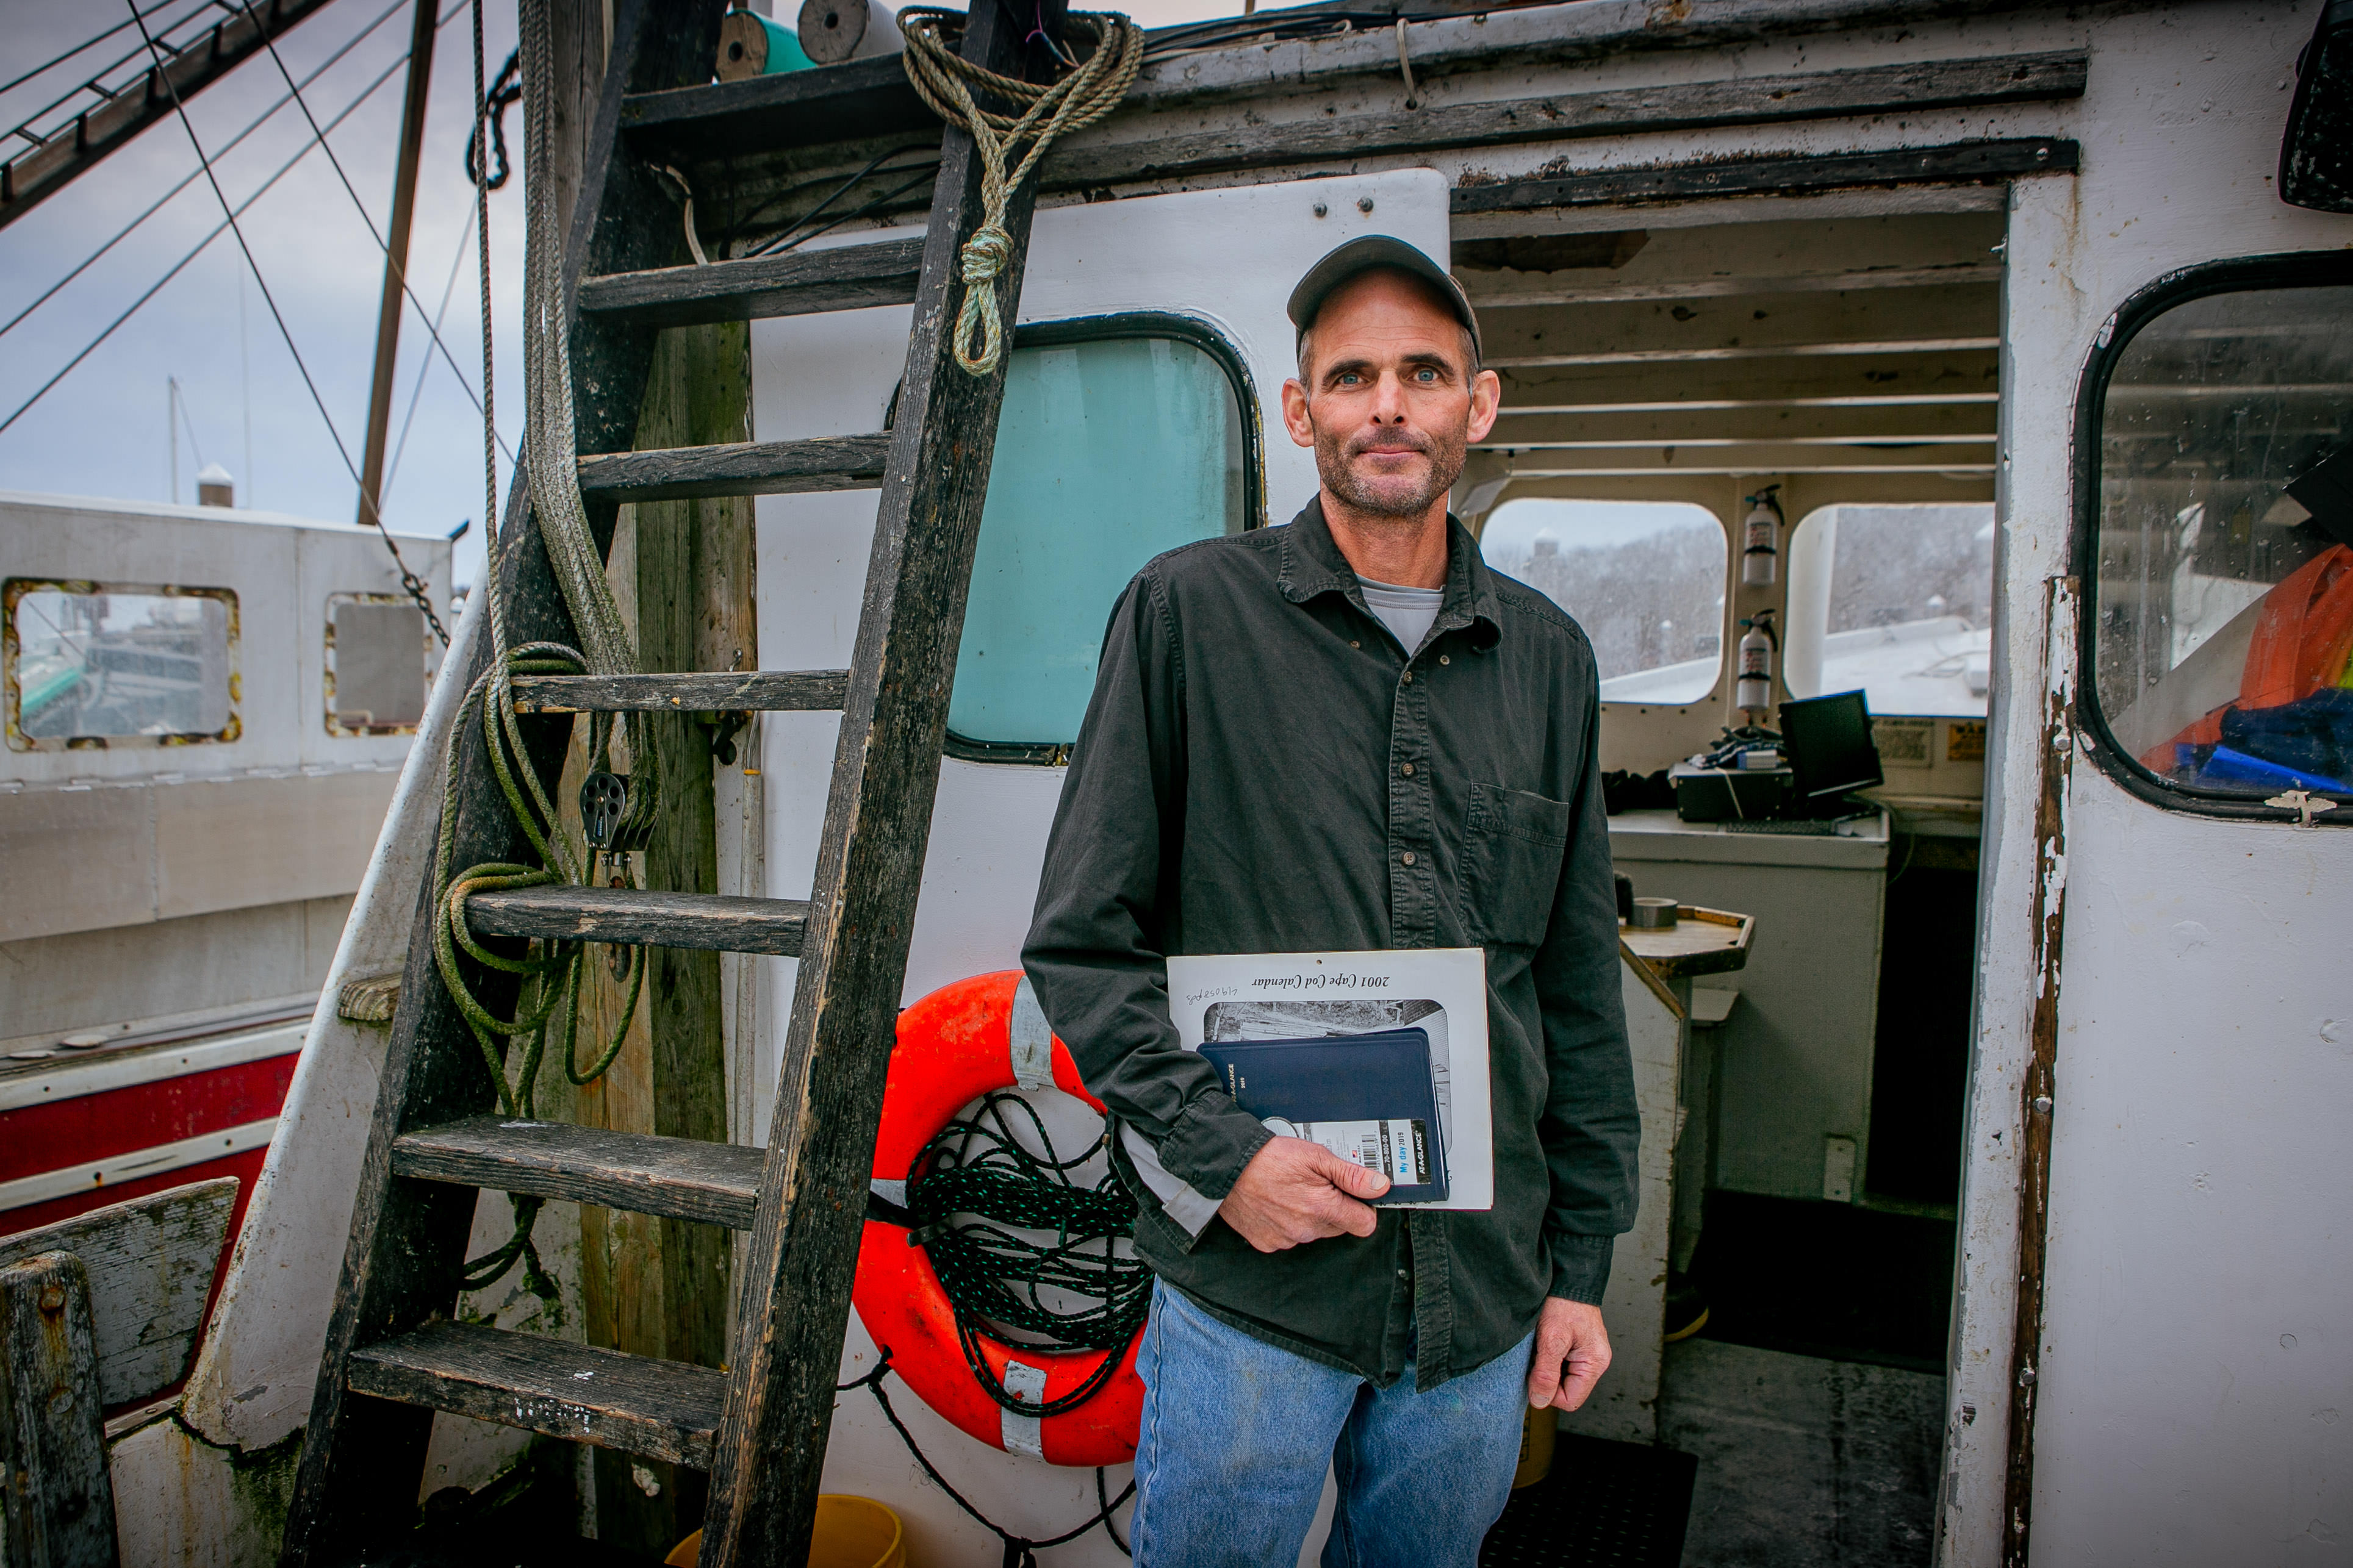 Kurt Martin, a commercial lobsterman and fisherman based in Chatham, Massachusetts, has watched the climate and fish availability shift over the years.